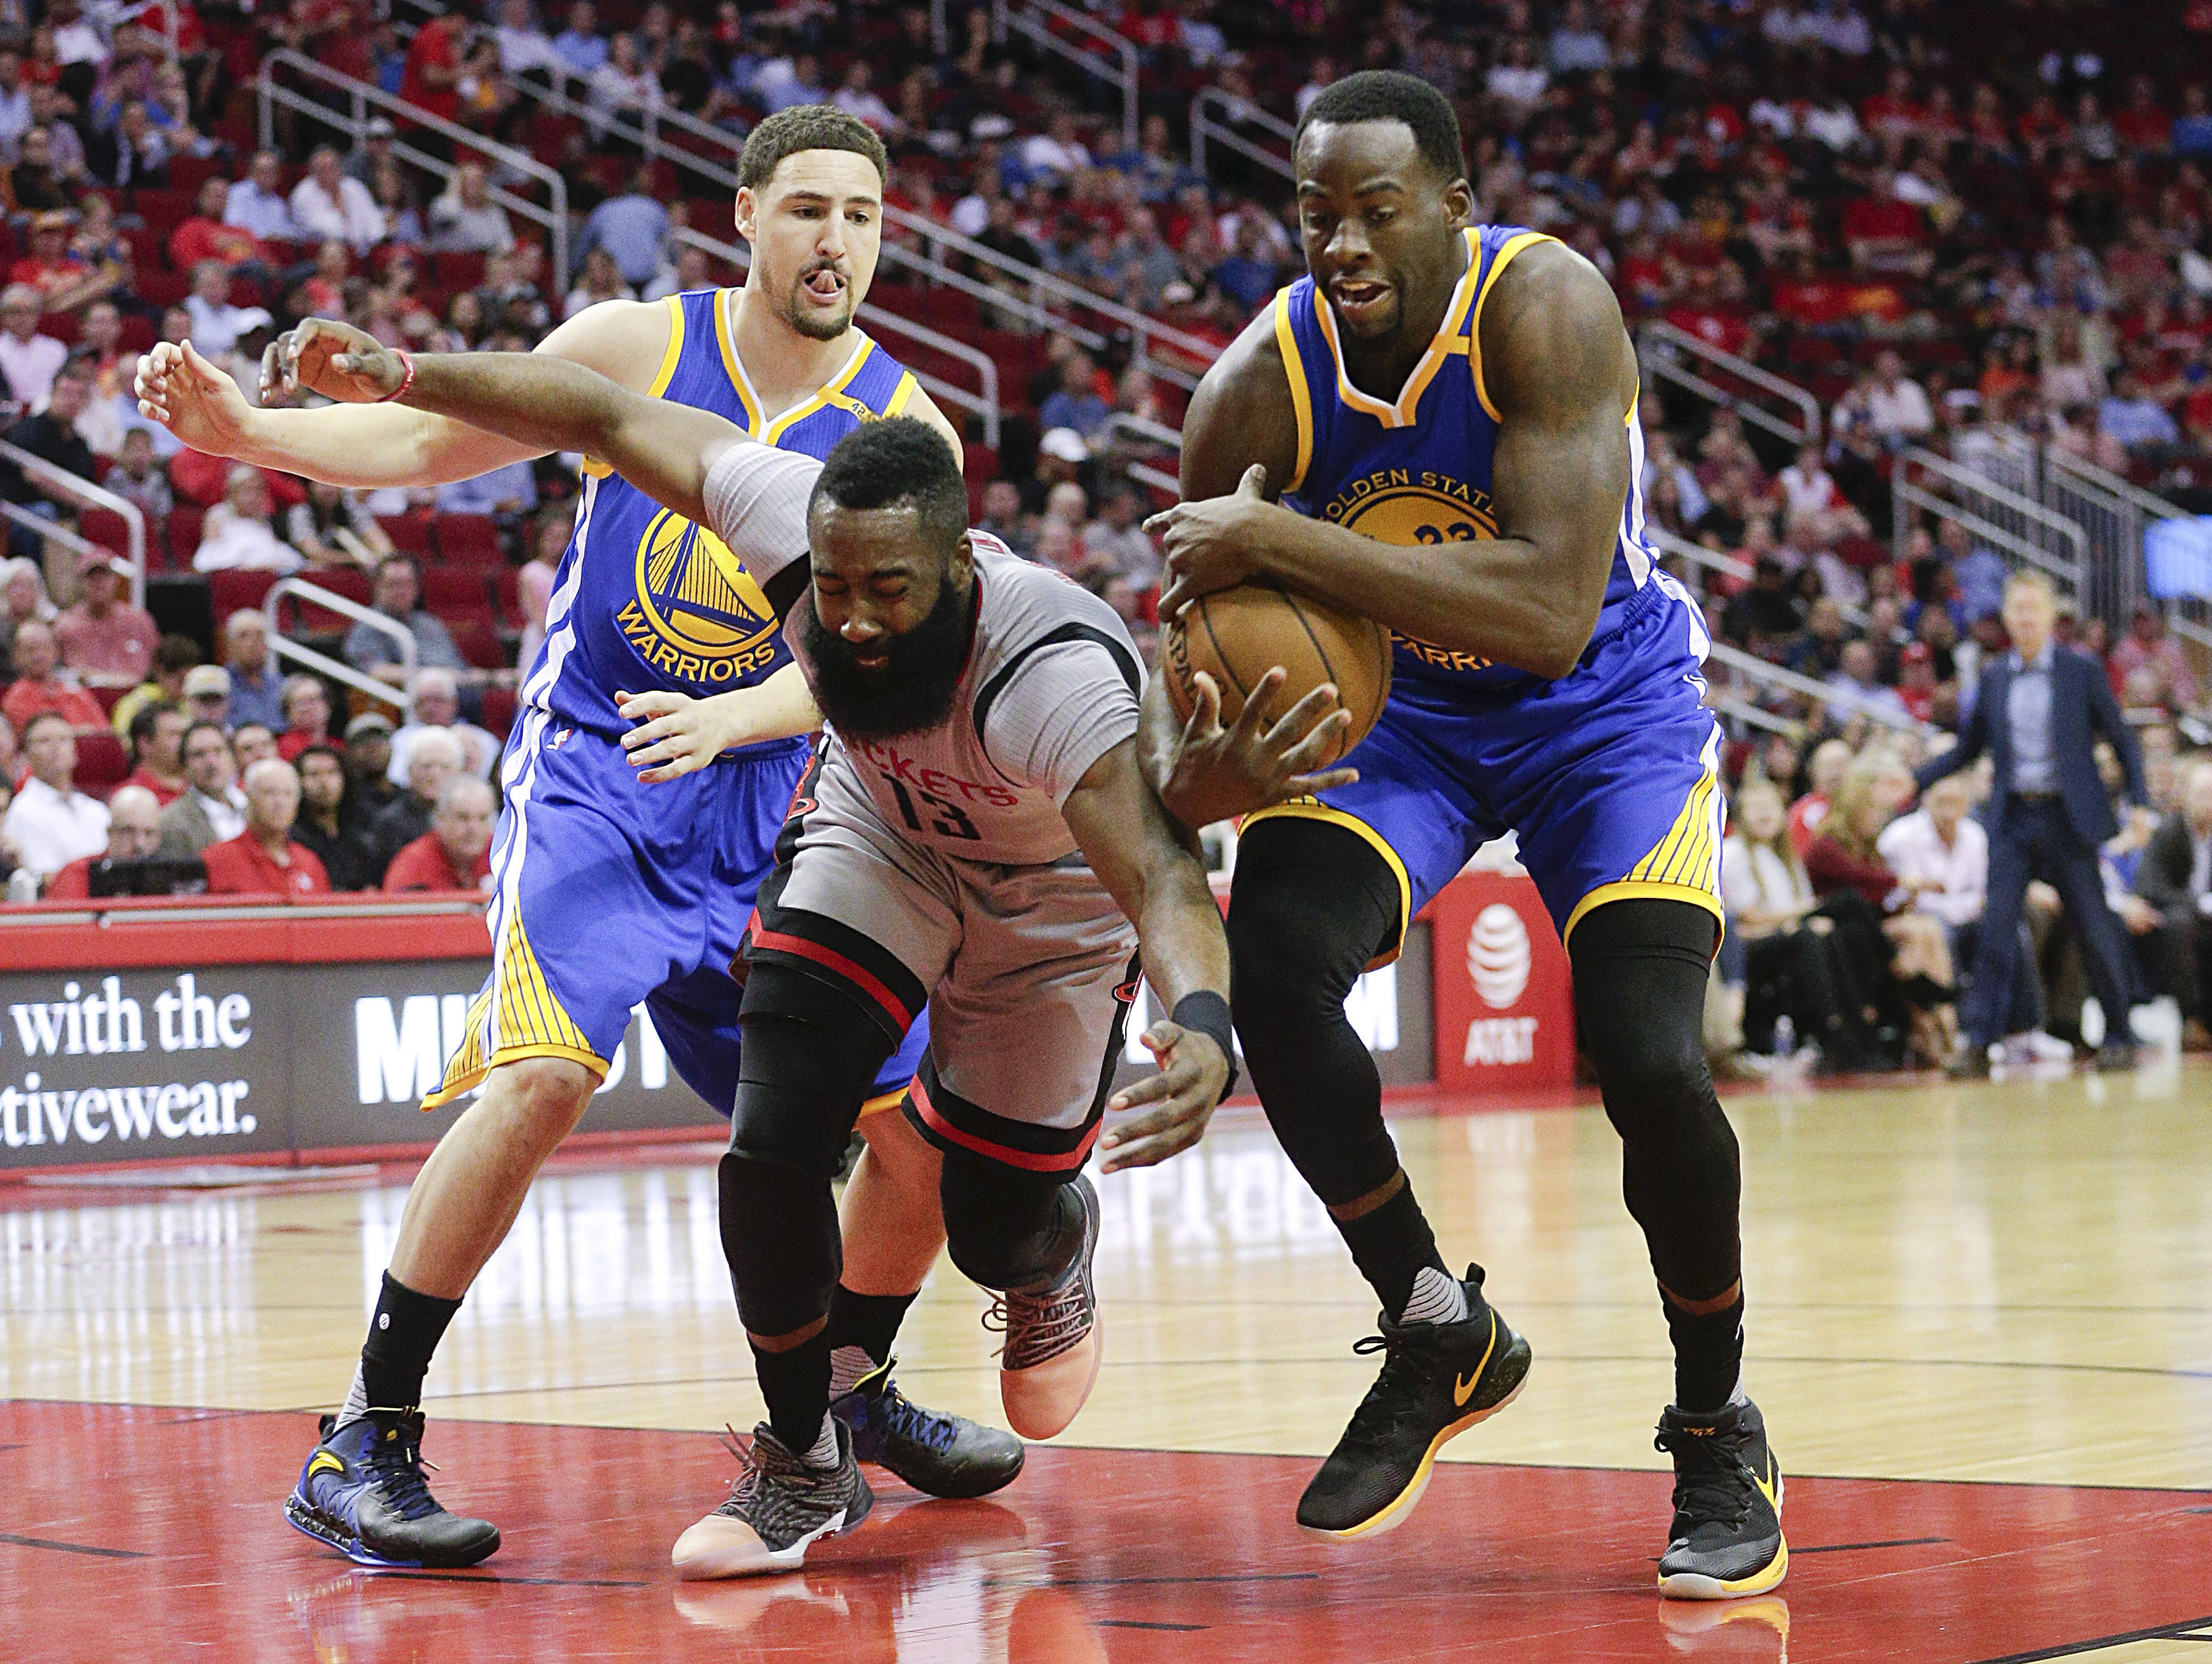 Draymond Green explains James Harden punch: 'He pinched me'